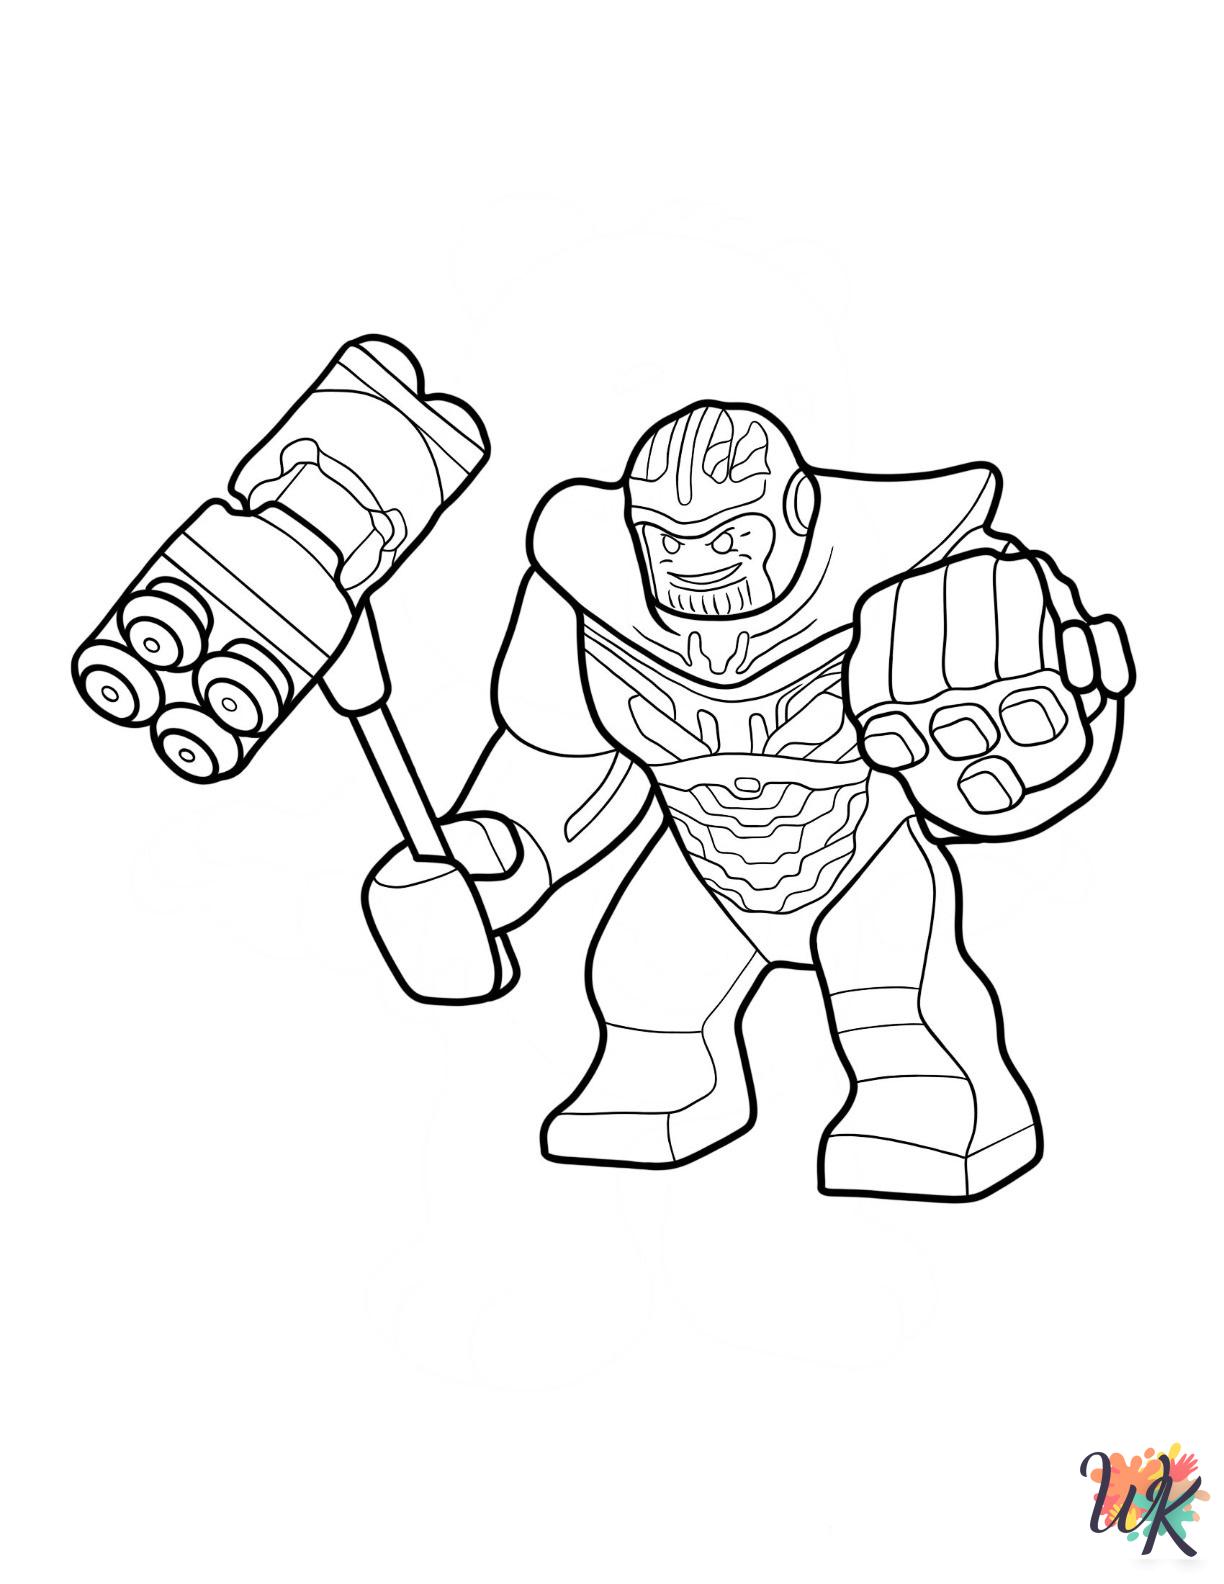 Lego Avengers coloring pages printable